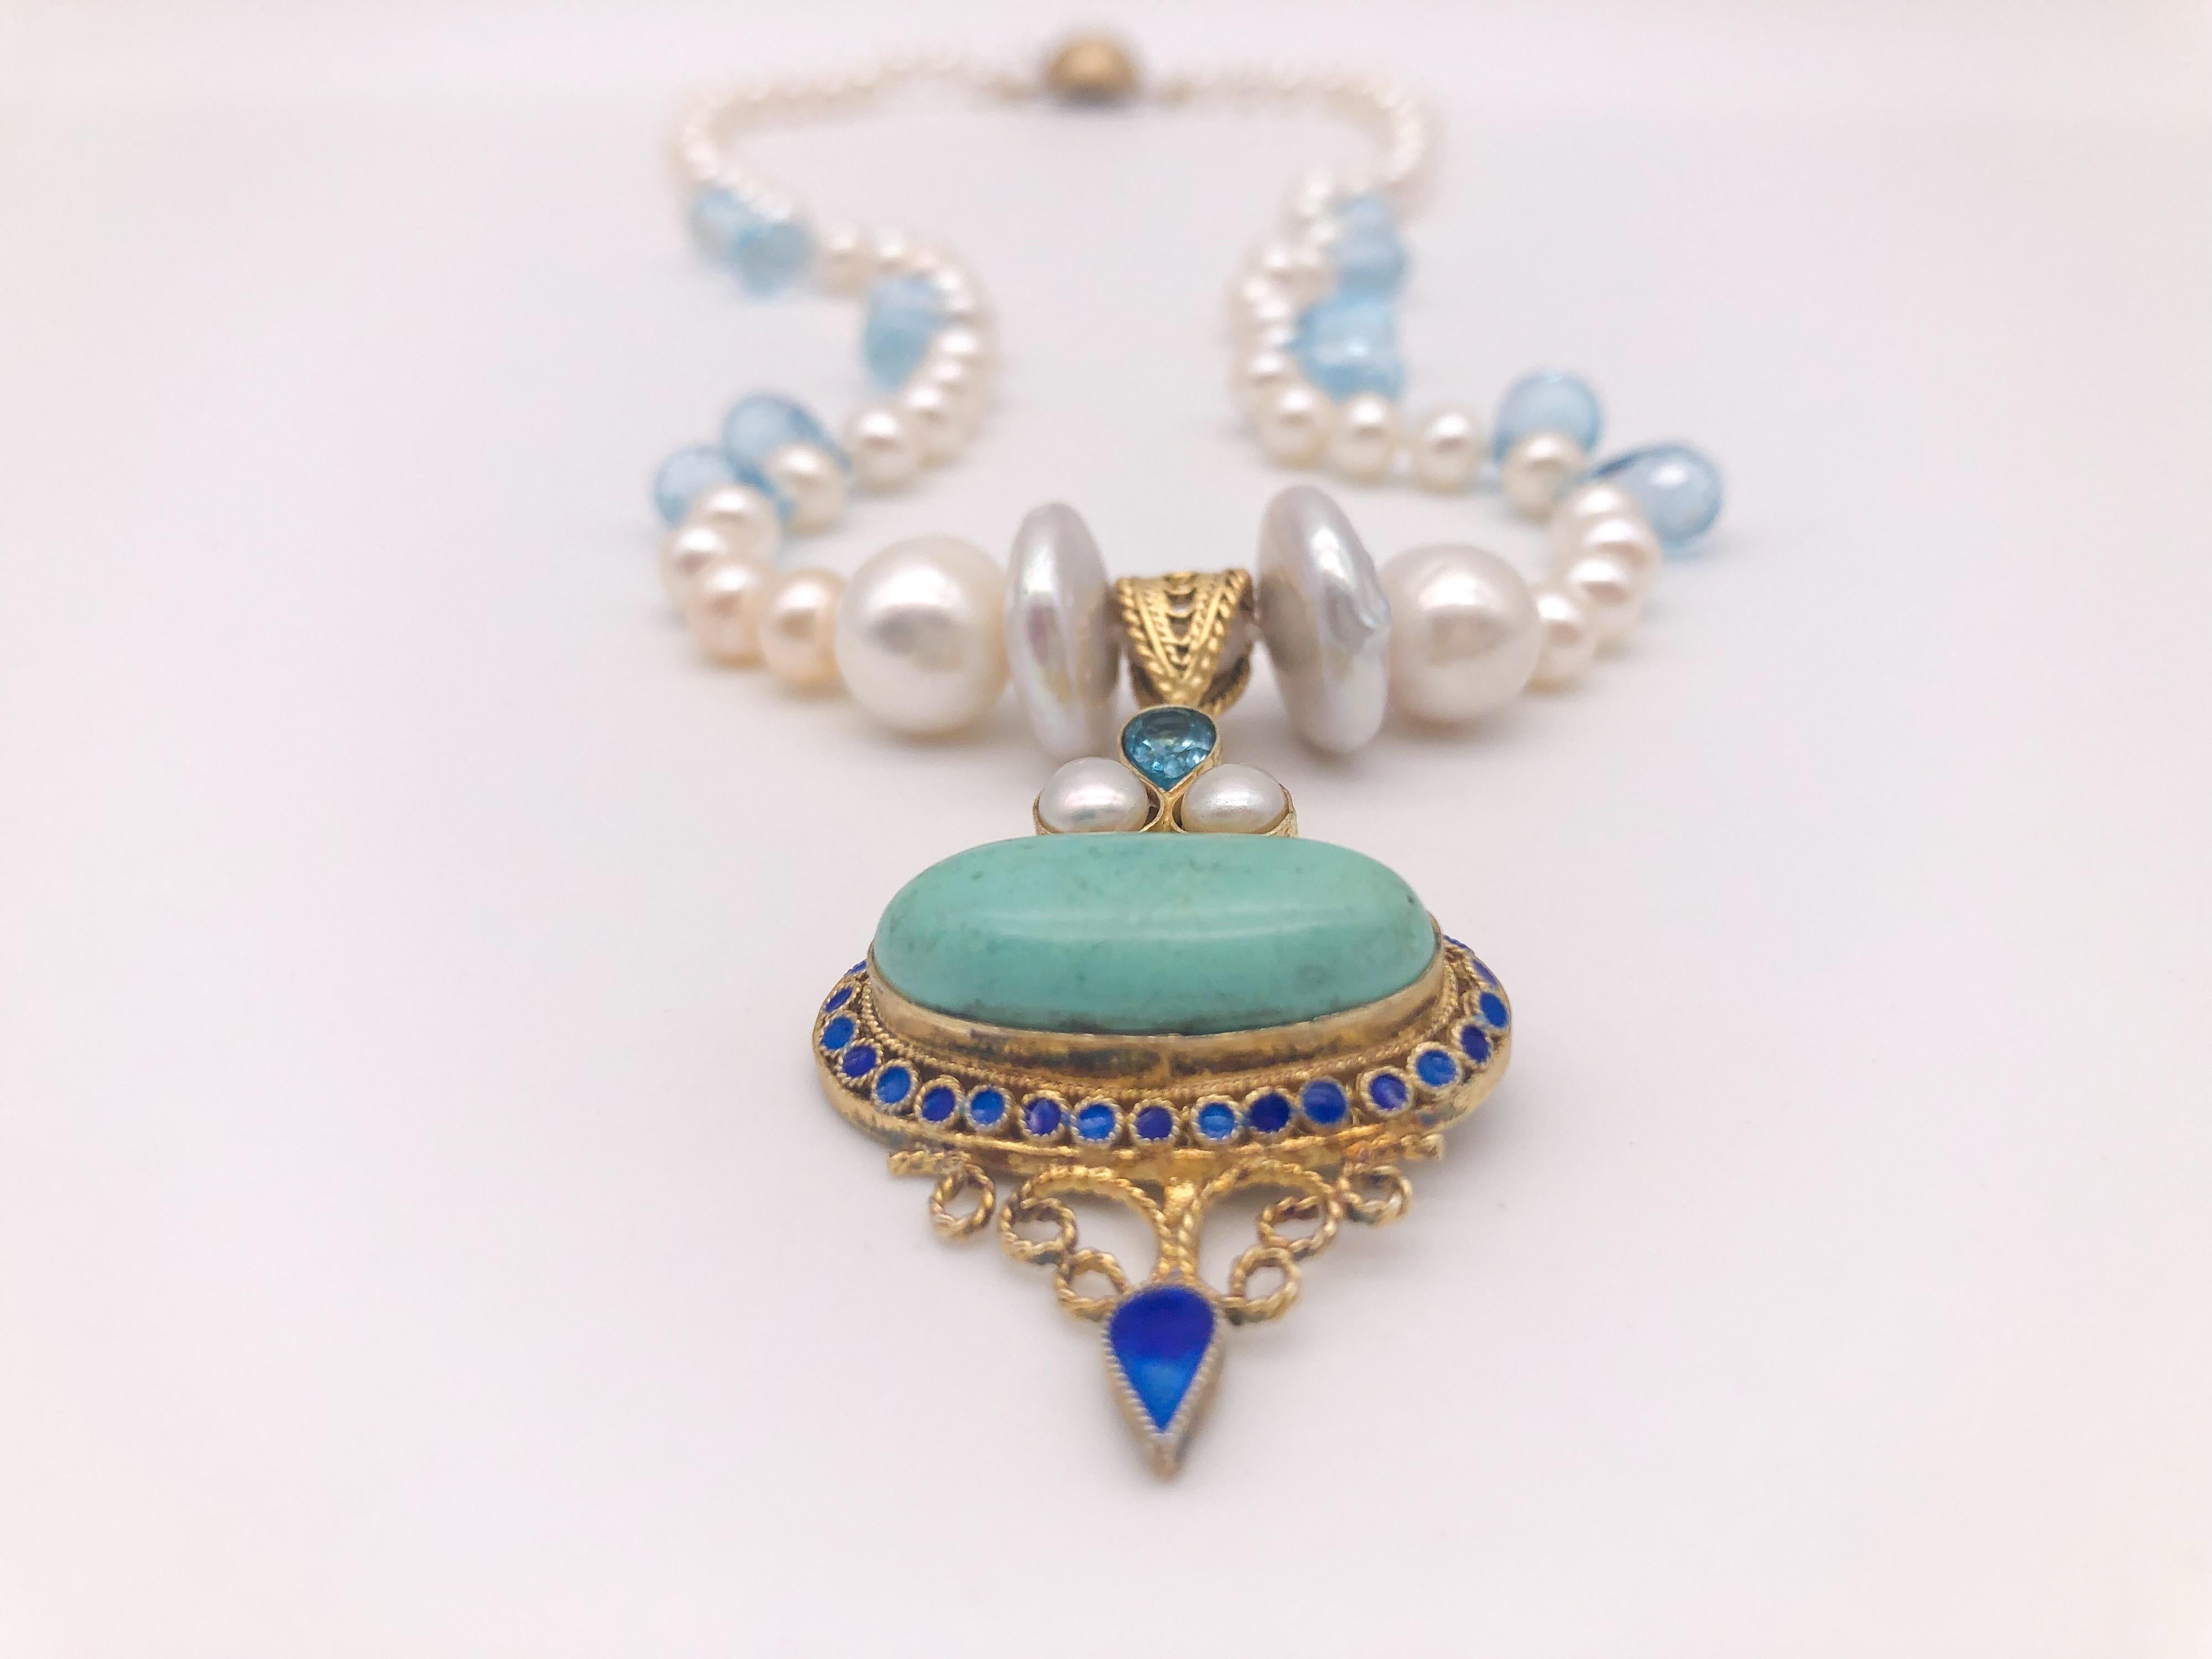 One-of-a-Kind
Single strand 6mm Pearls hand-knotted between Blue Topaz teardrops necklace.
The necklace supports a Barbara Garwood Blue topaz, Pearl, and Turquoise enameled pendant. The pendant was made in Mongolia by a woman’s cooperative under Ms.